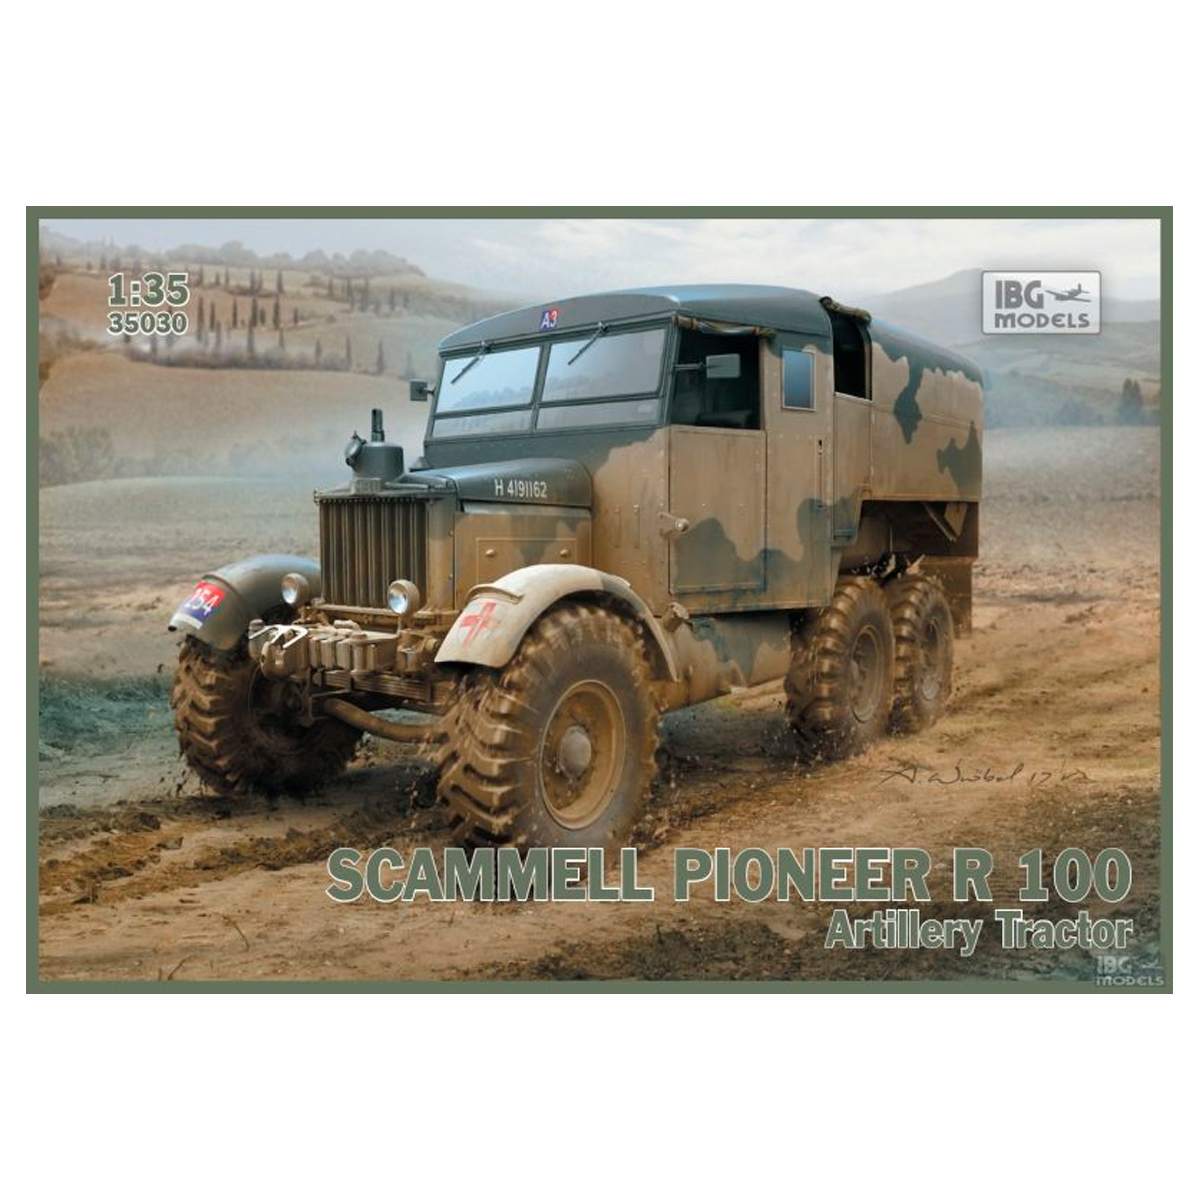 Scammell Pioneer R 100 Artillery Tractor 1/35